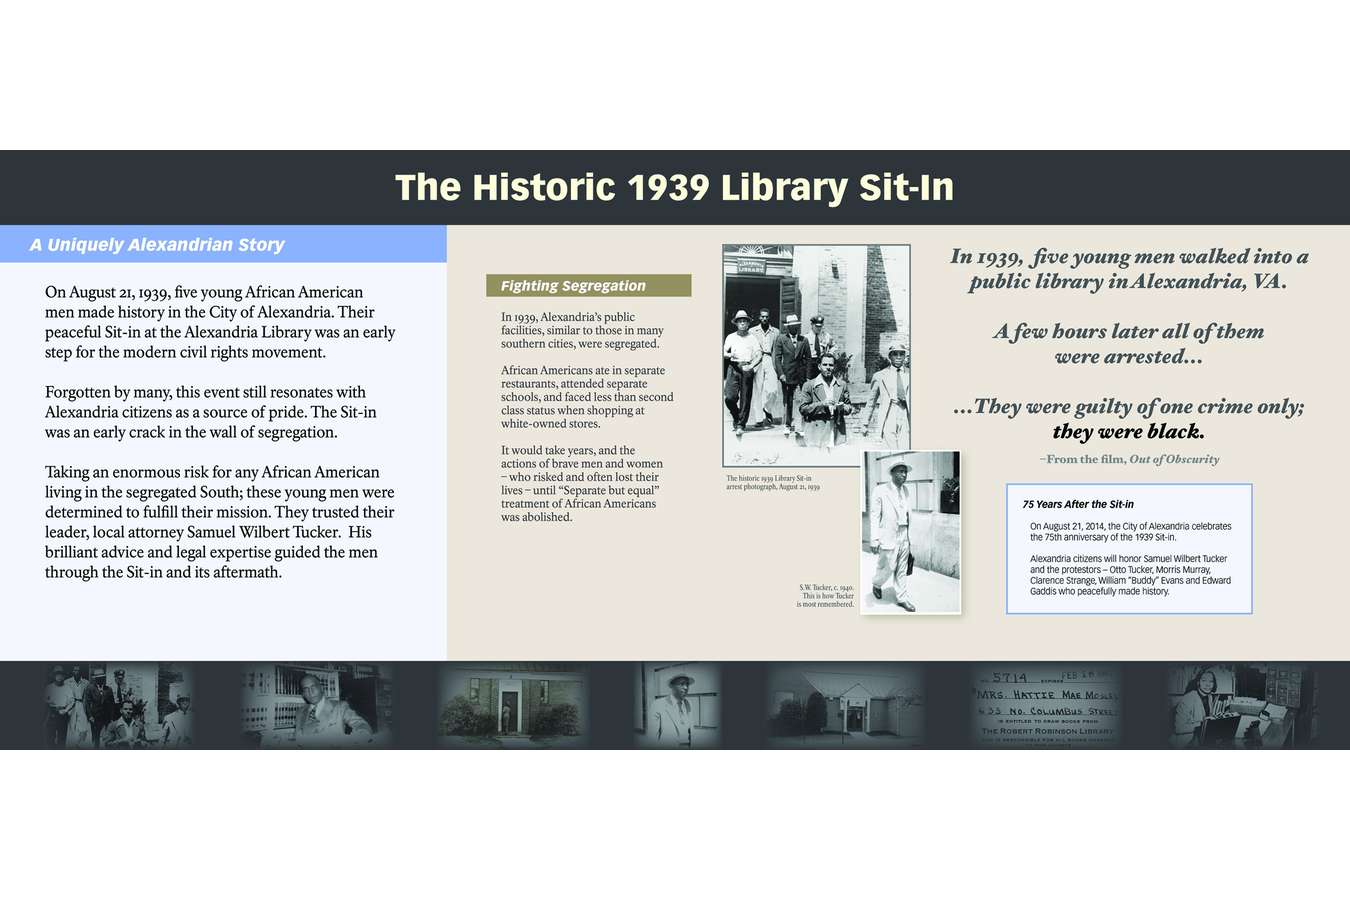 3 ABHM Sitin P1 : The Alexandria Library Sit-in was an early crack in the wall of segregation